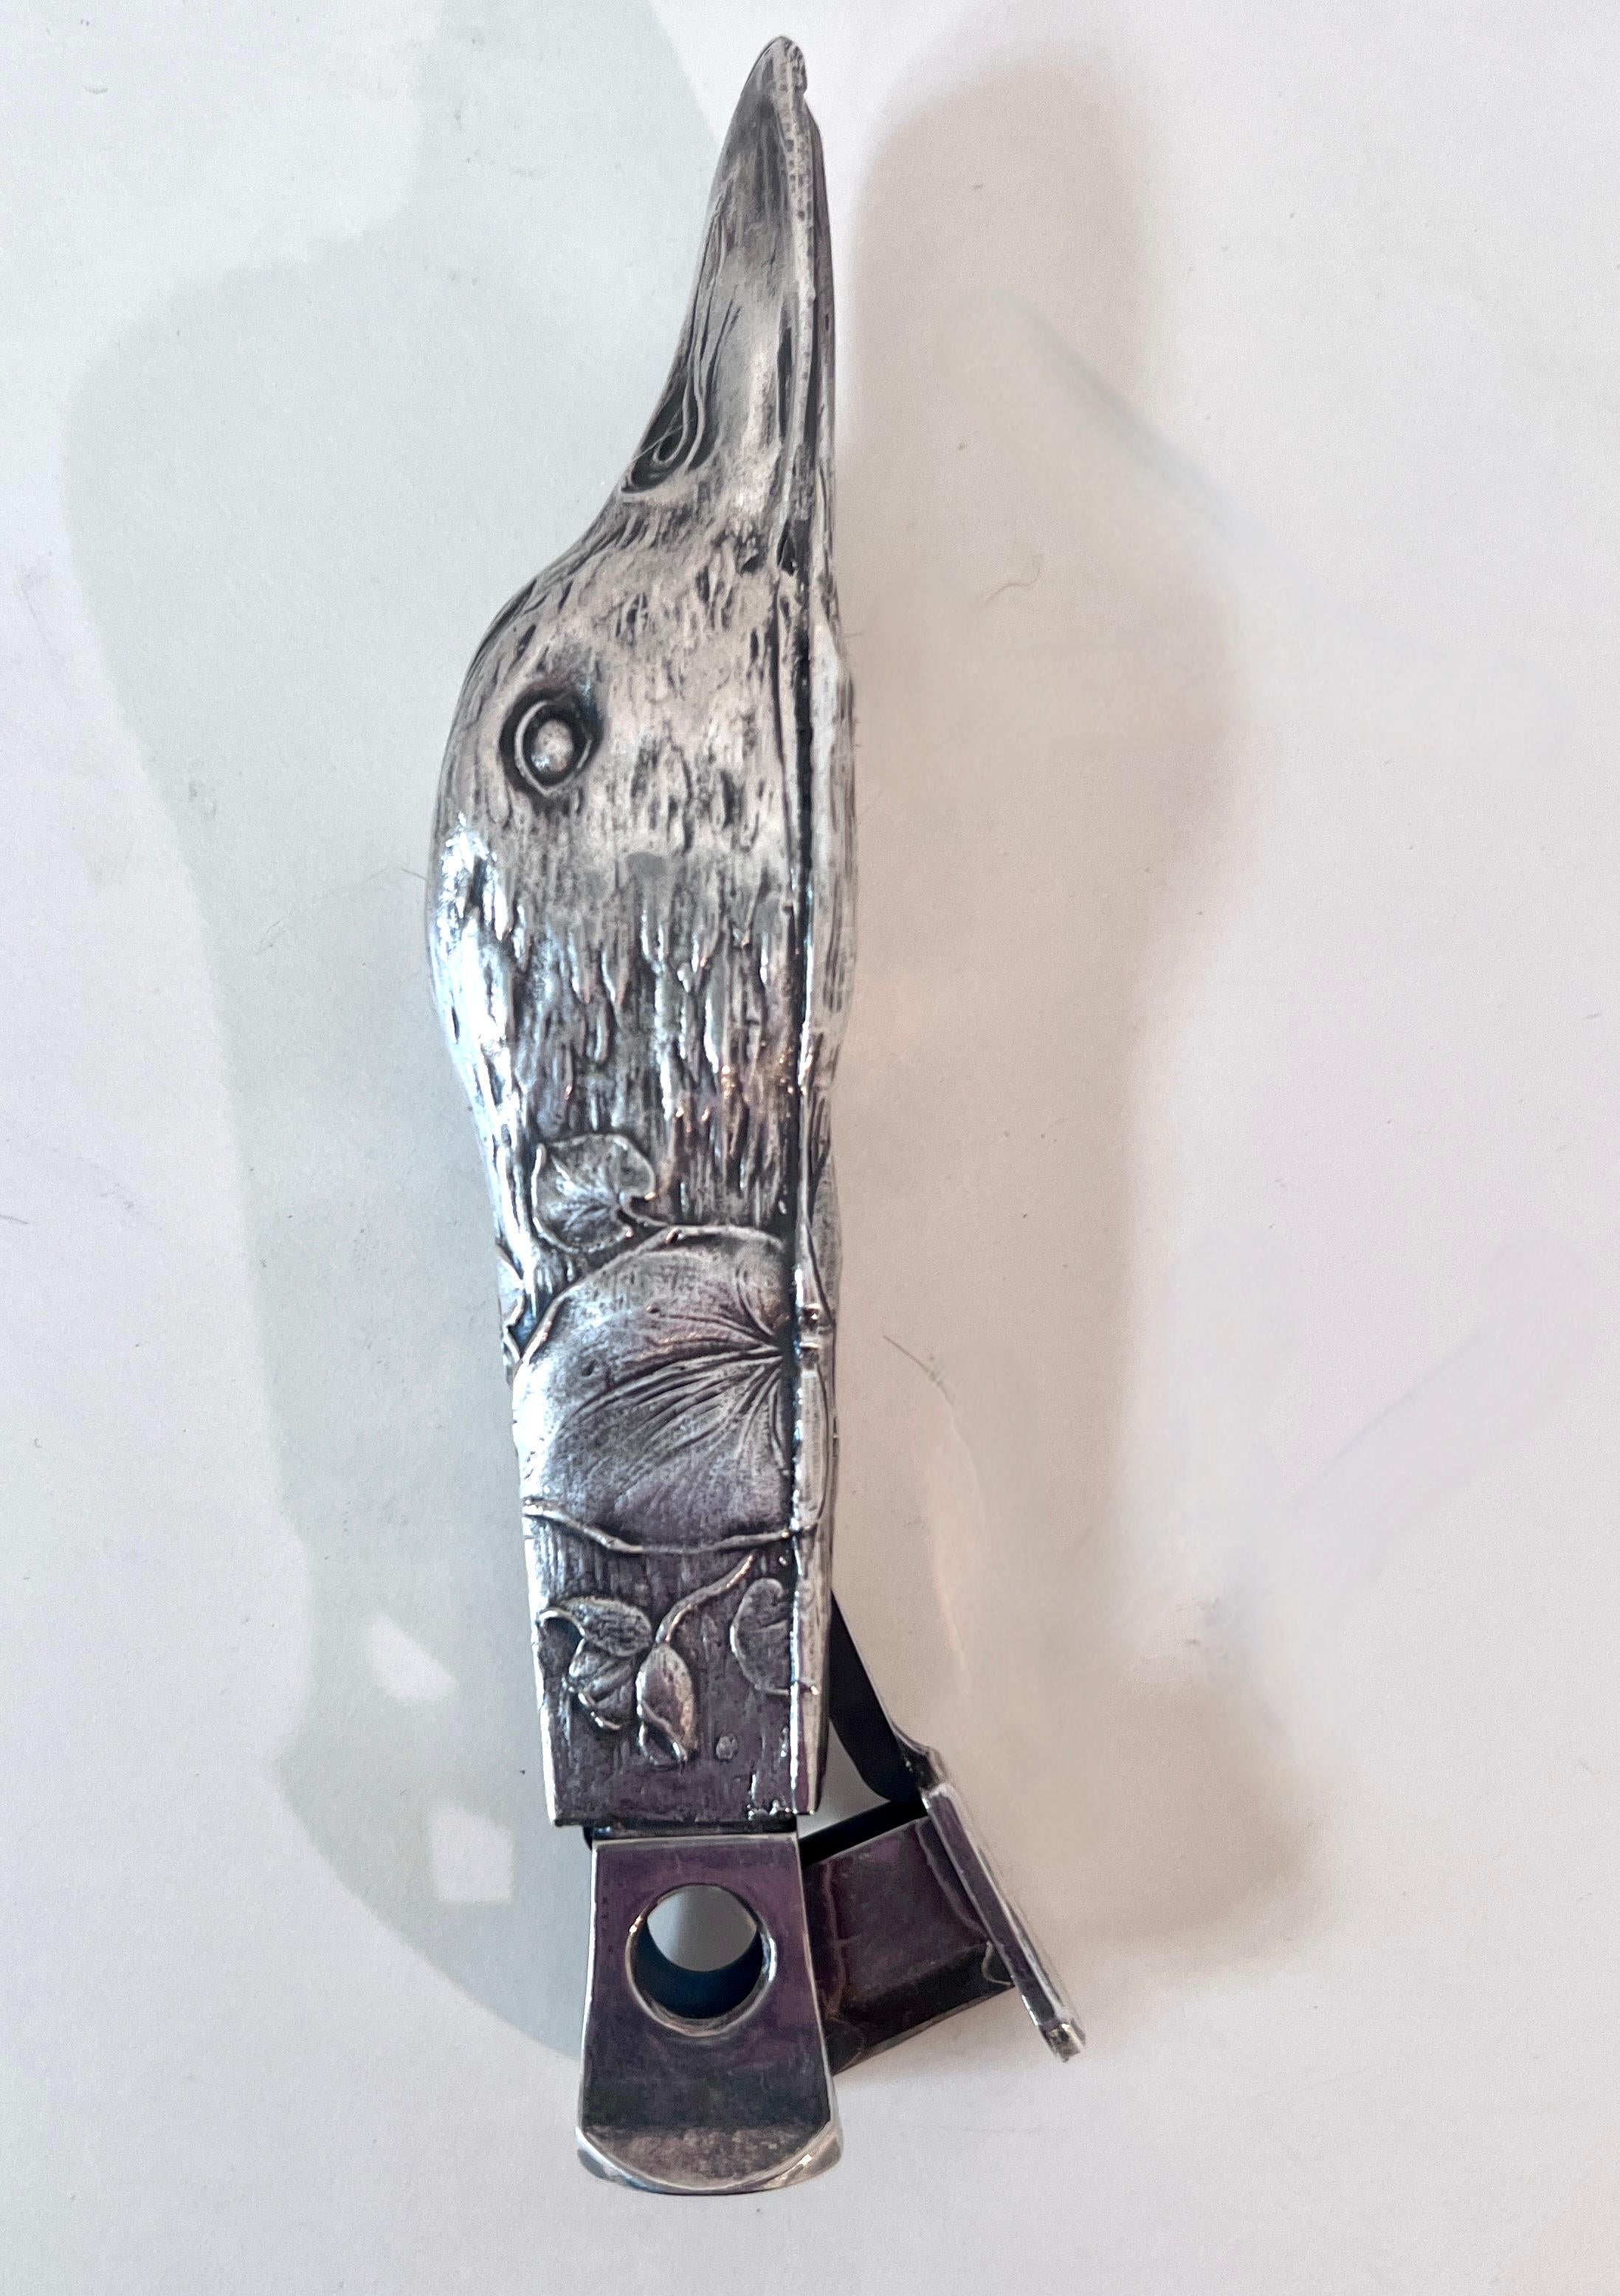 Nickel Silver Cigar, Cigarette or 420 Cutter in the form of a Repoussé Duck 

A wonderfully decorative piece, also in great working condition to cut 420 or Cigars.  A compliment to 
any smoking room, bar or desk.

The Repoussé Duck is very well